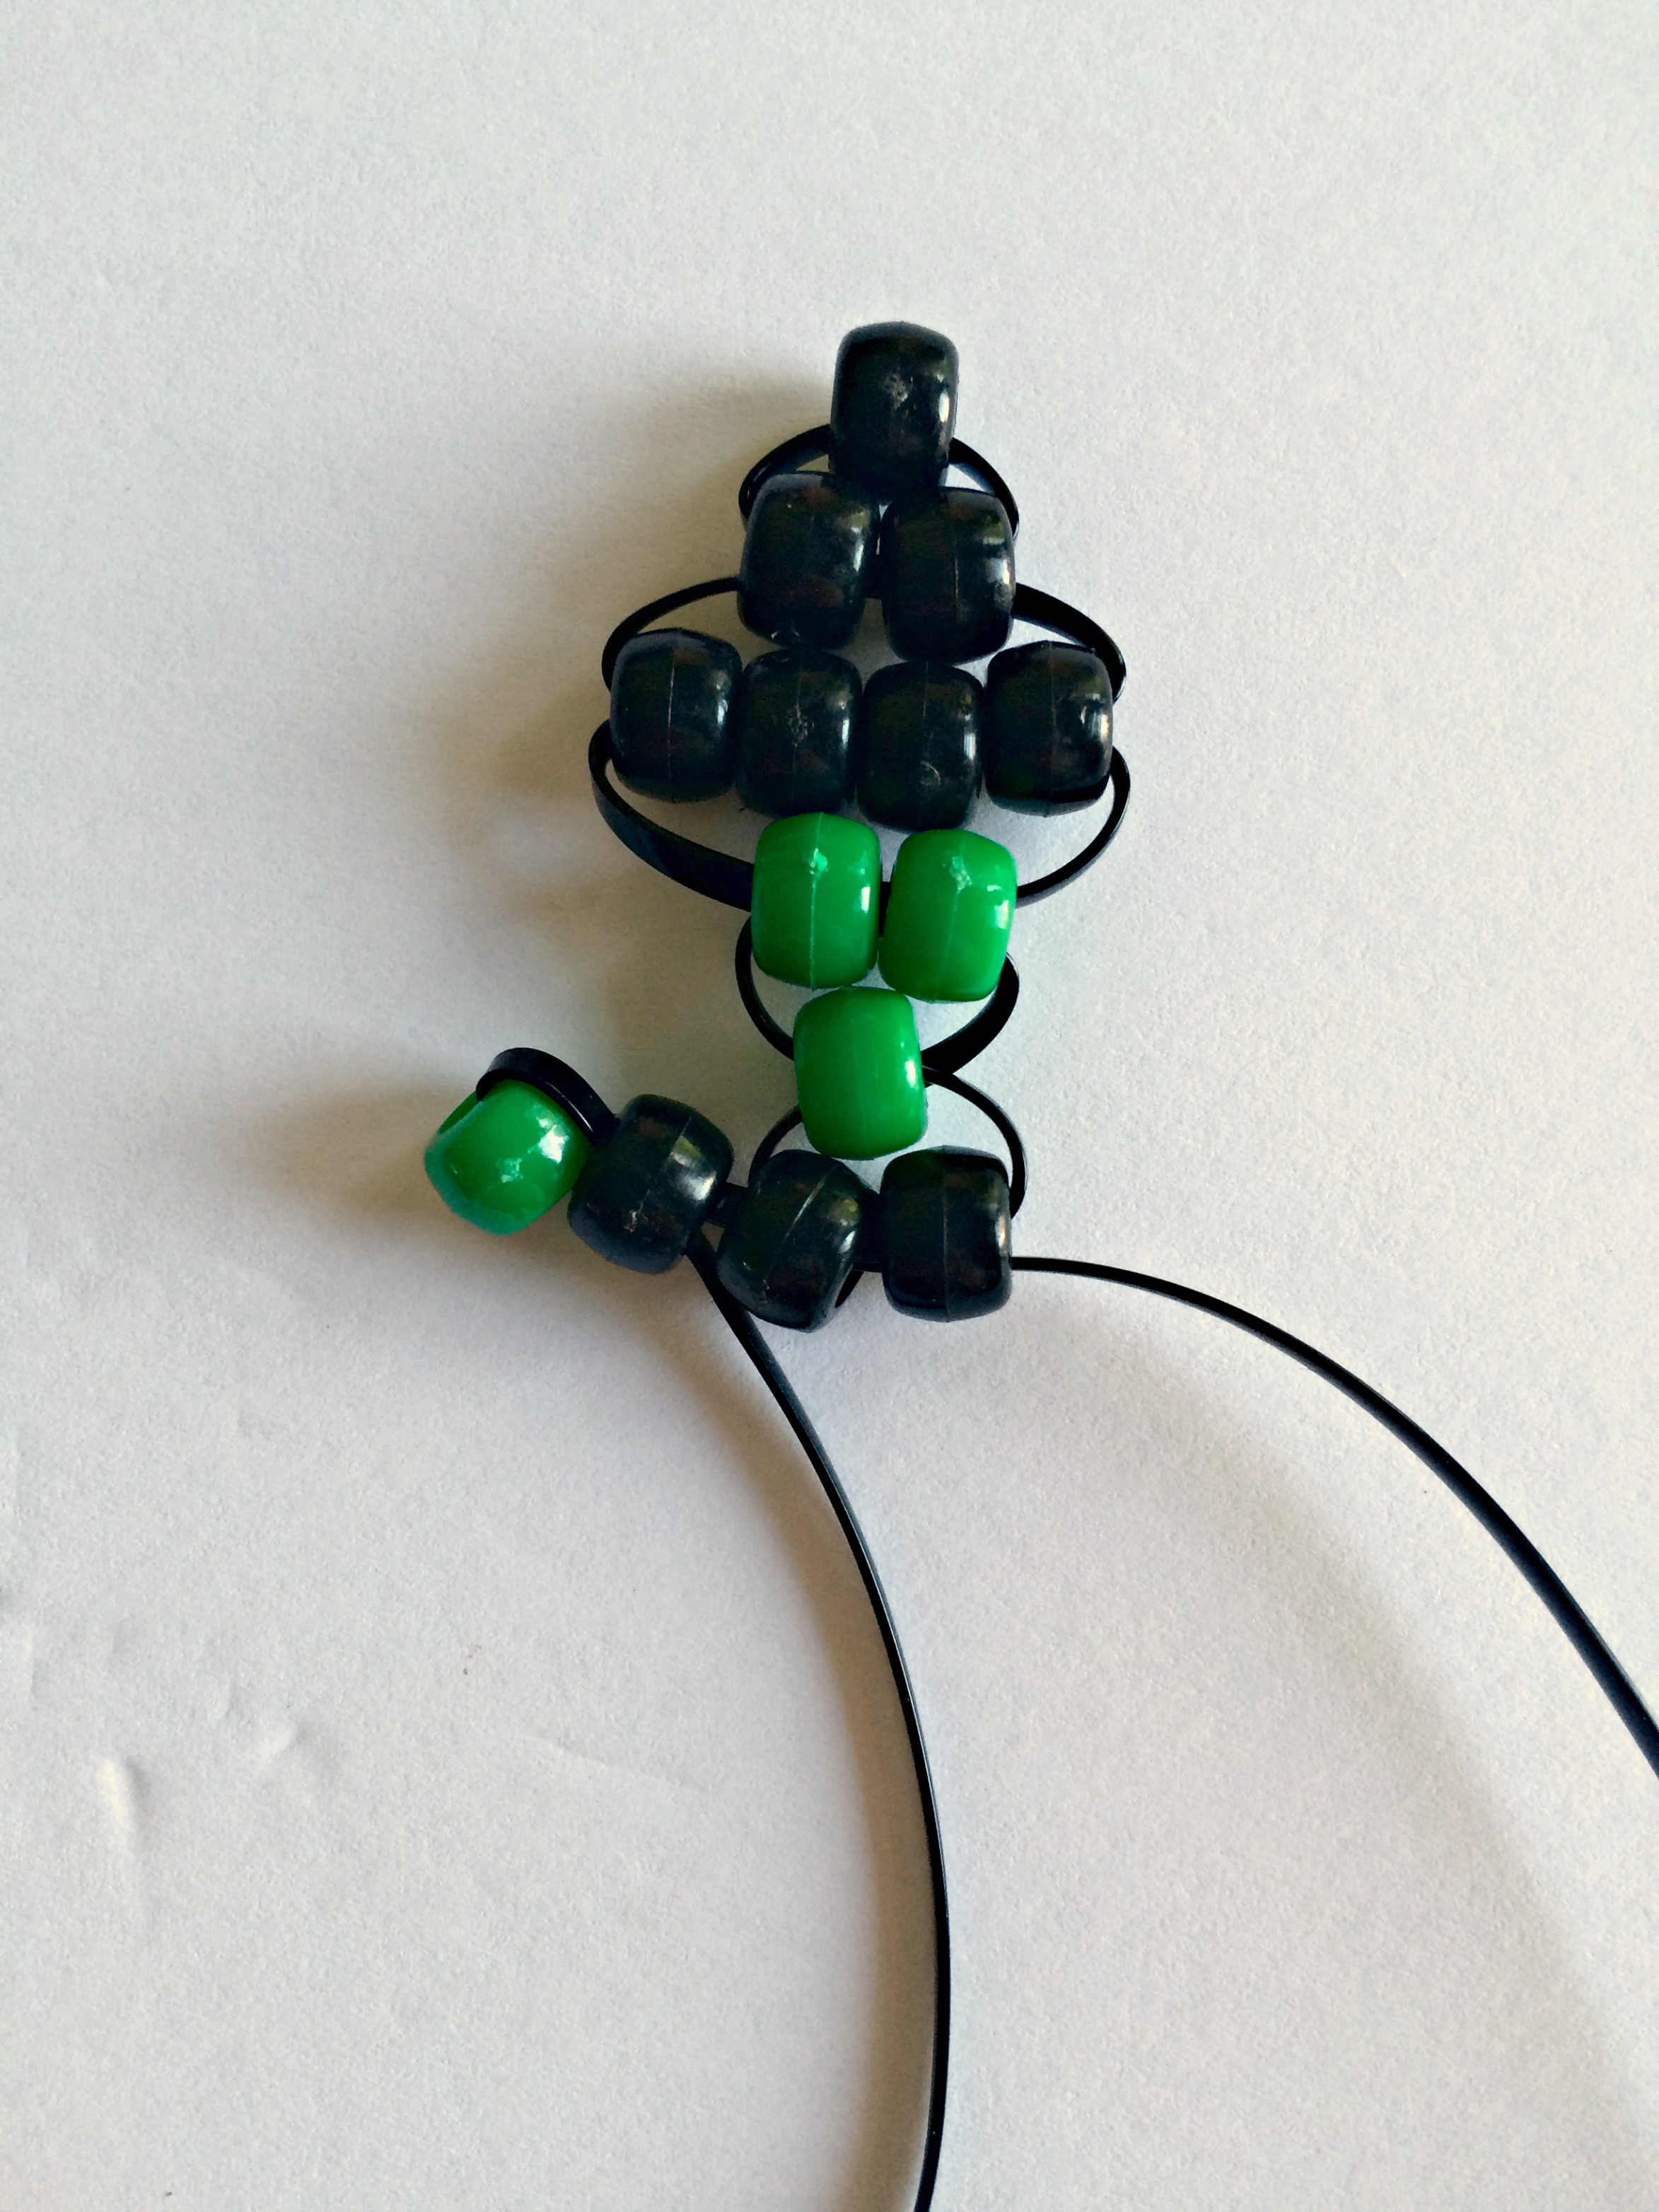 Learn how to make this witch pony bead beadie buddie for Hallowe'en @ GagenGirls.com